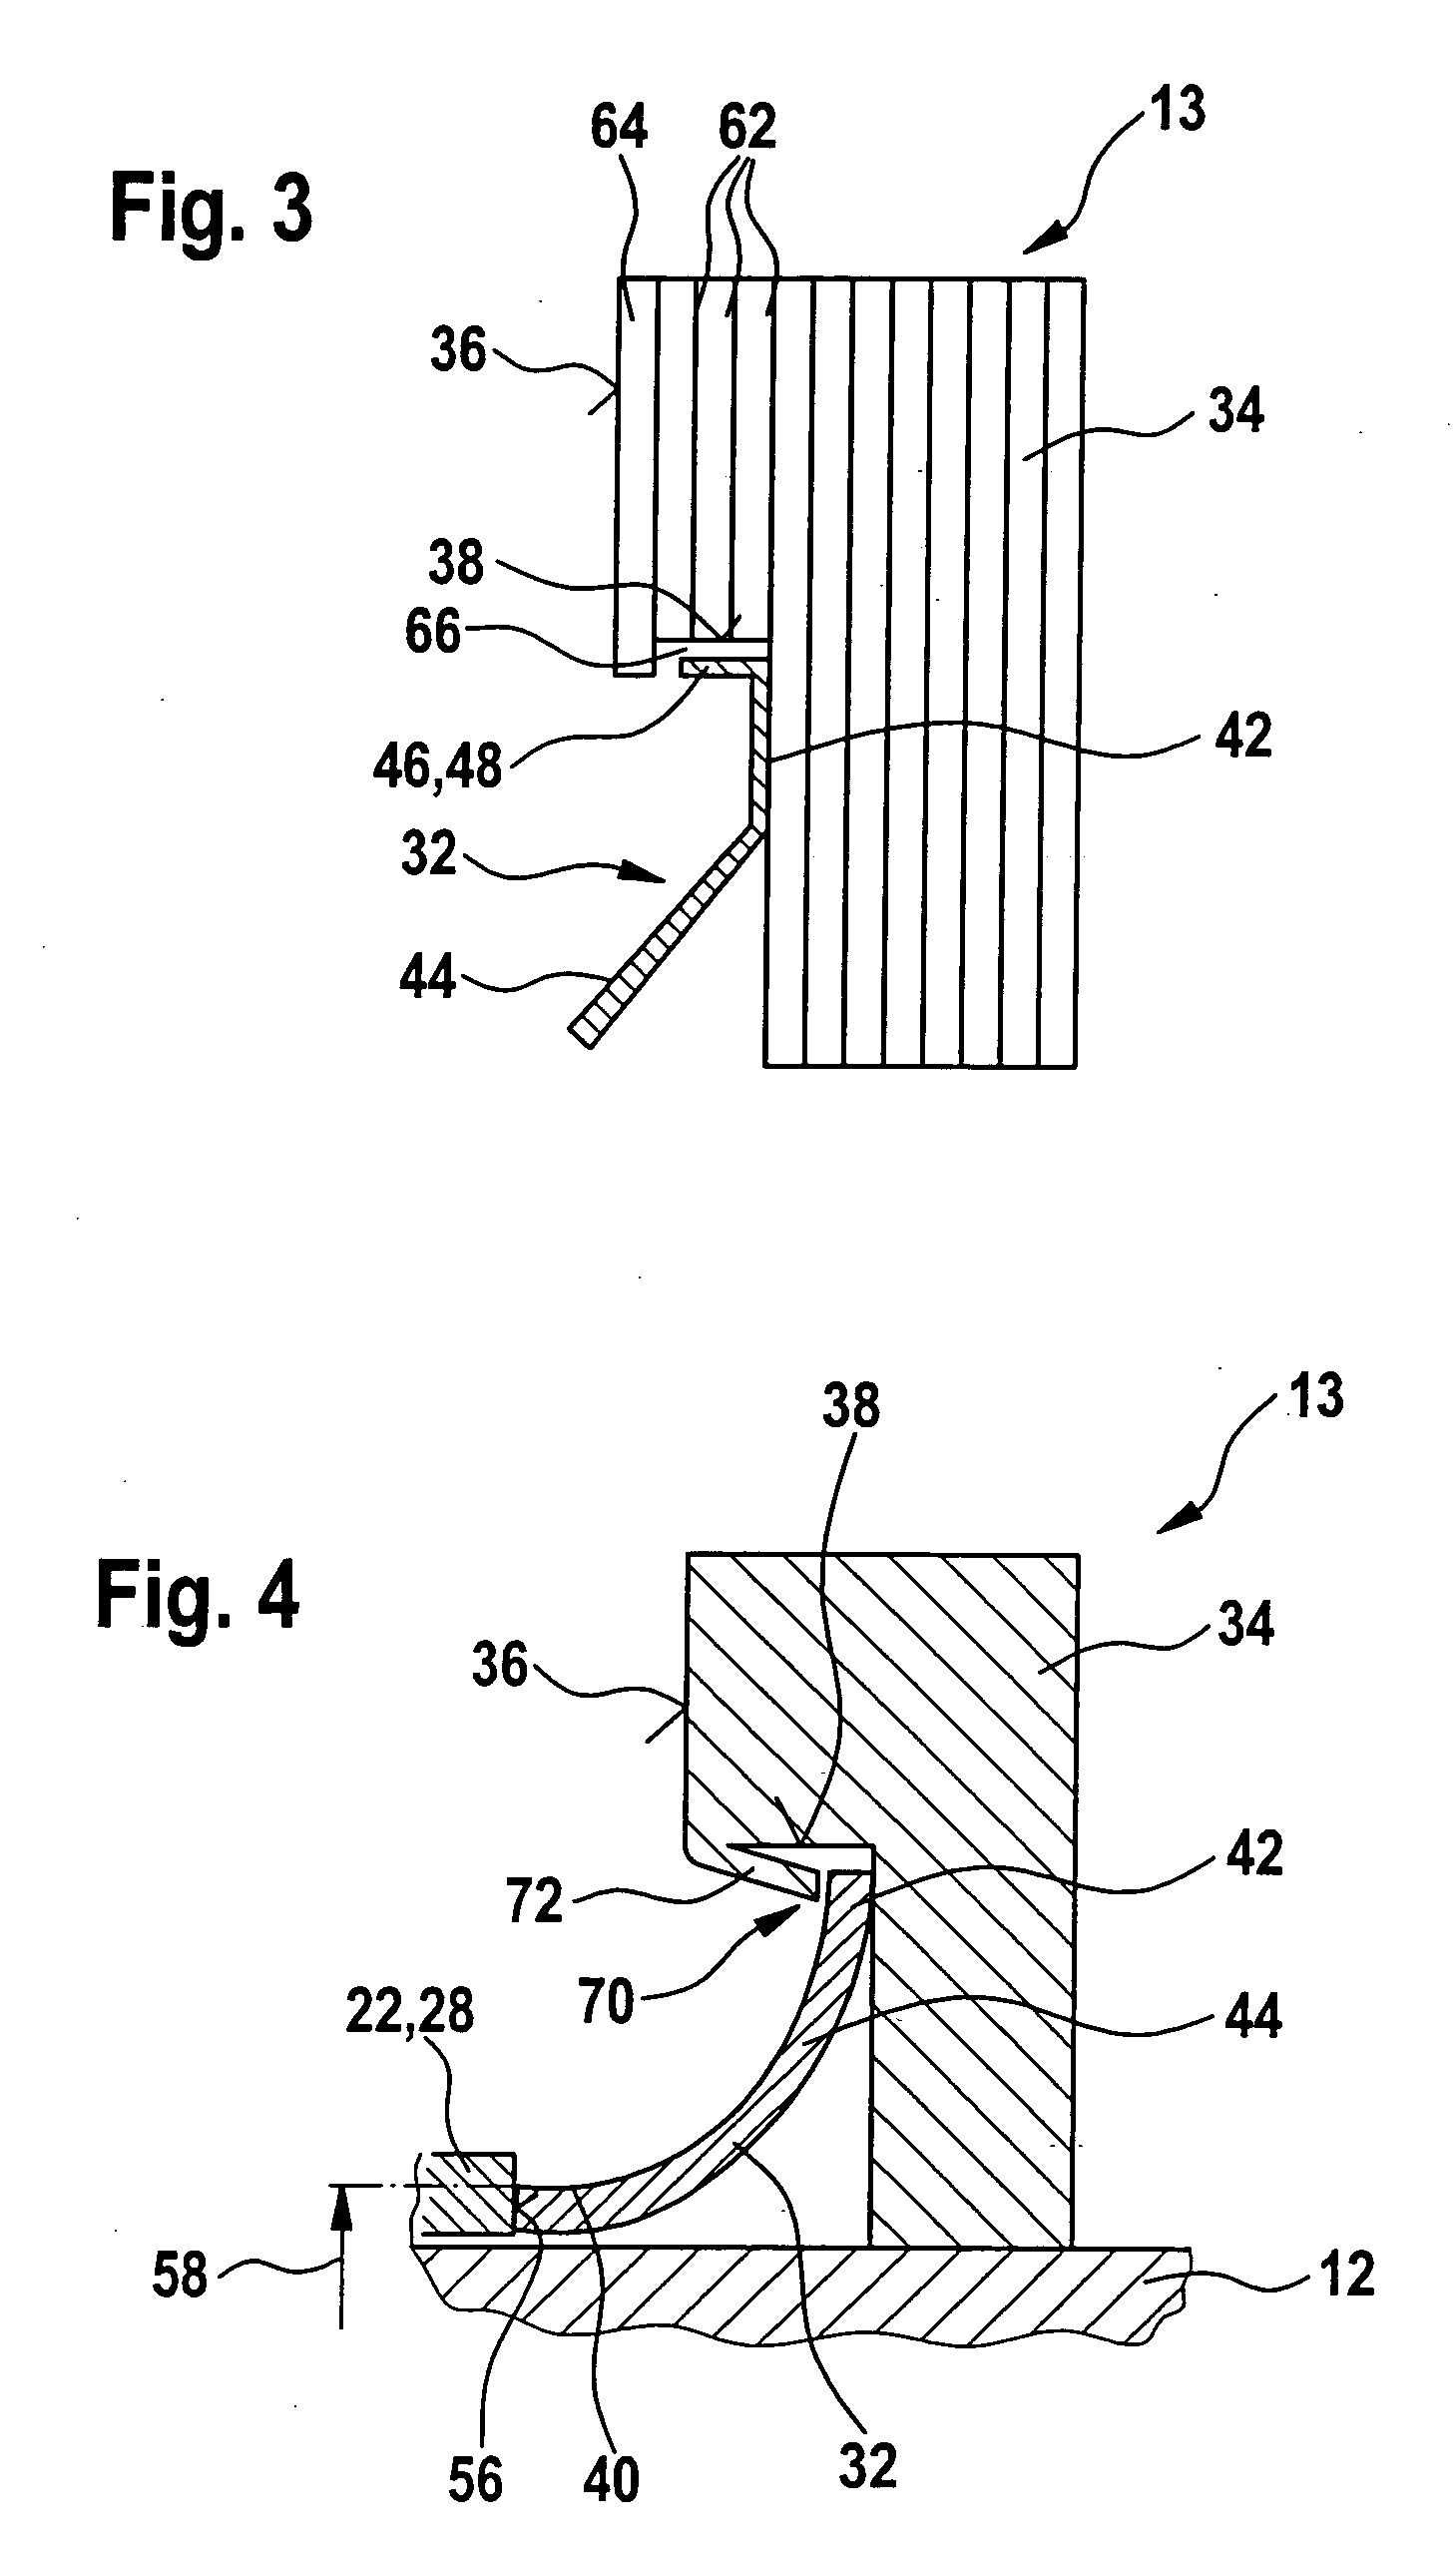 Electric Machine Comprising an Axial Spring-Loaded Element